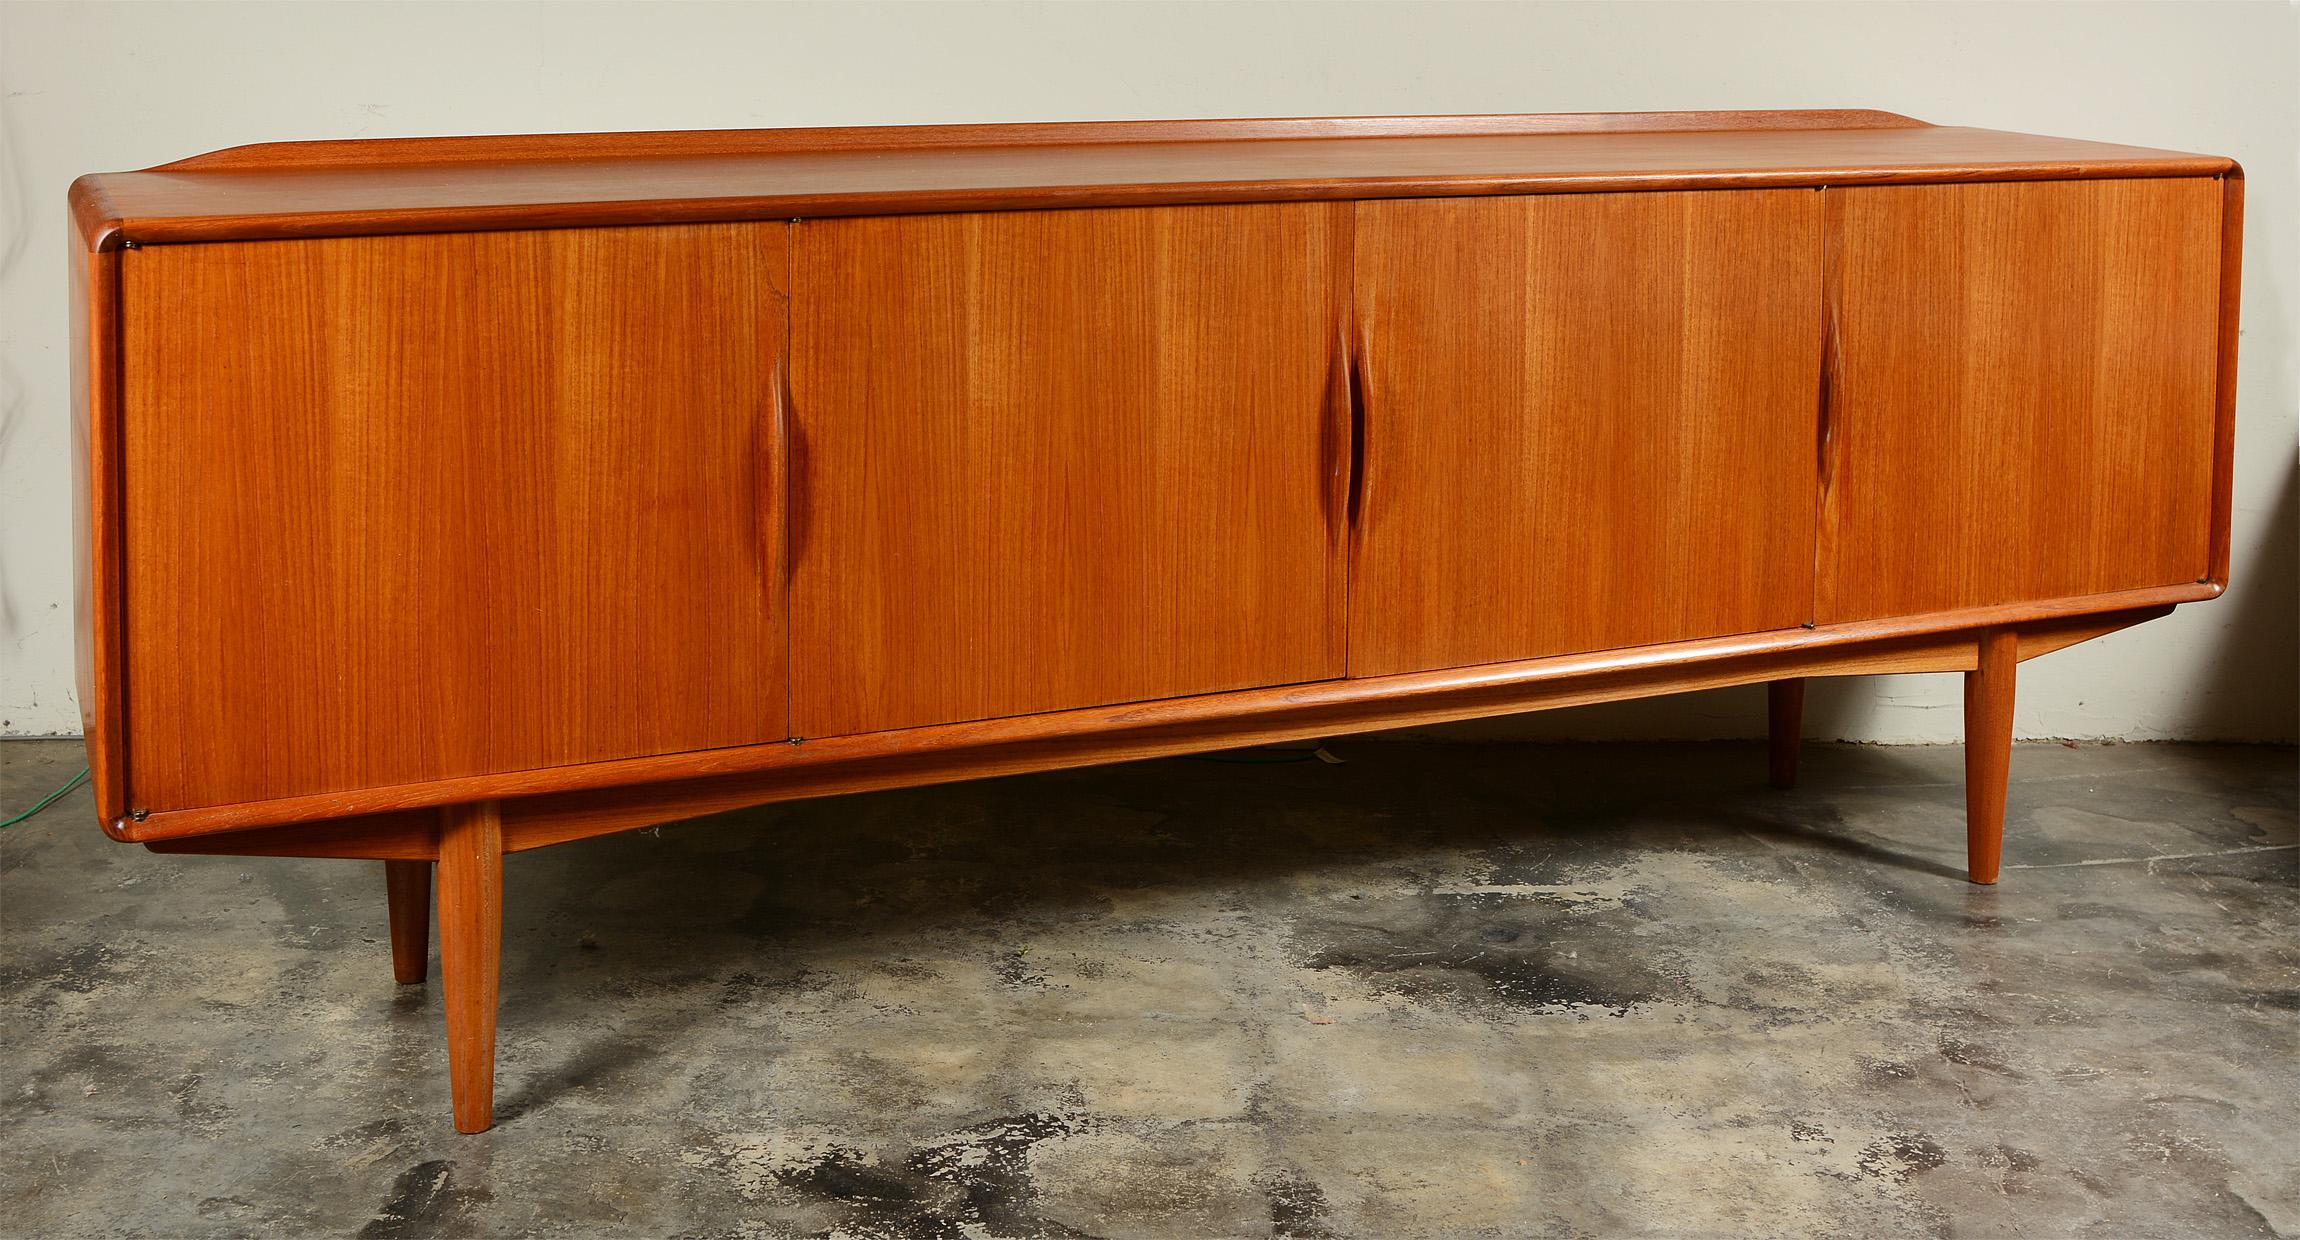 Sleek Norwegian teak credenza by Alf Aaseth for Gustaf Bahus. This has sculptural handles, rounded corners and a raised lip across the back of the top. There are four doors concealing one long shelf in the center and three small drawers and one